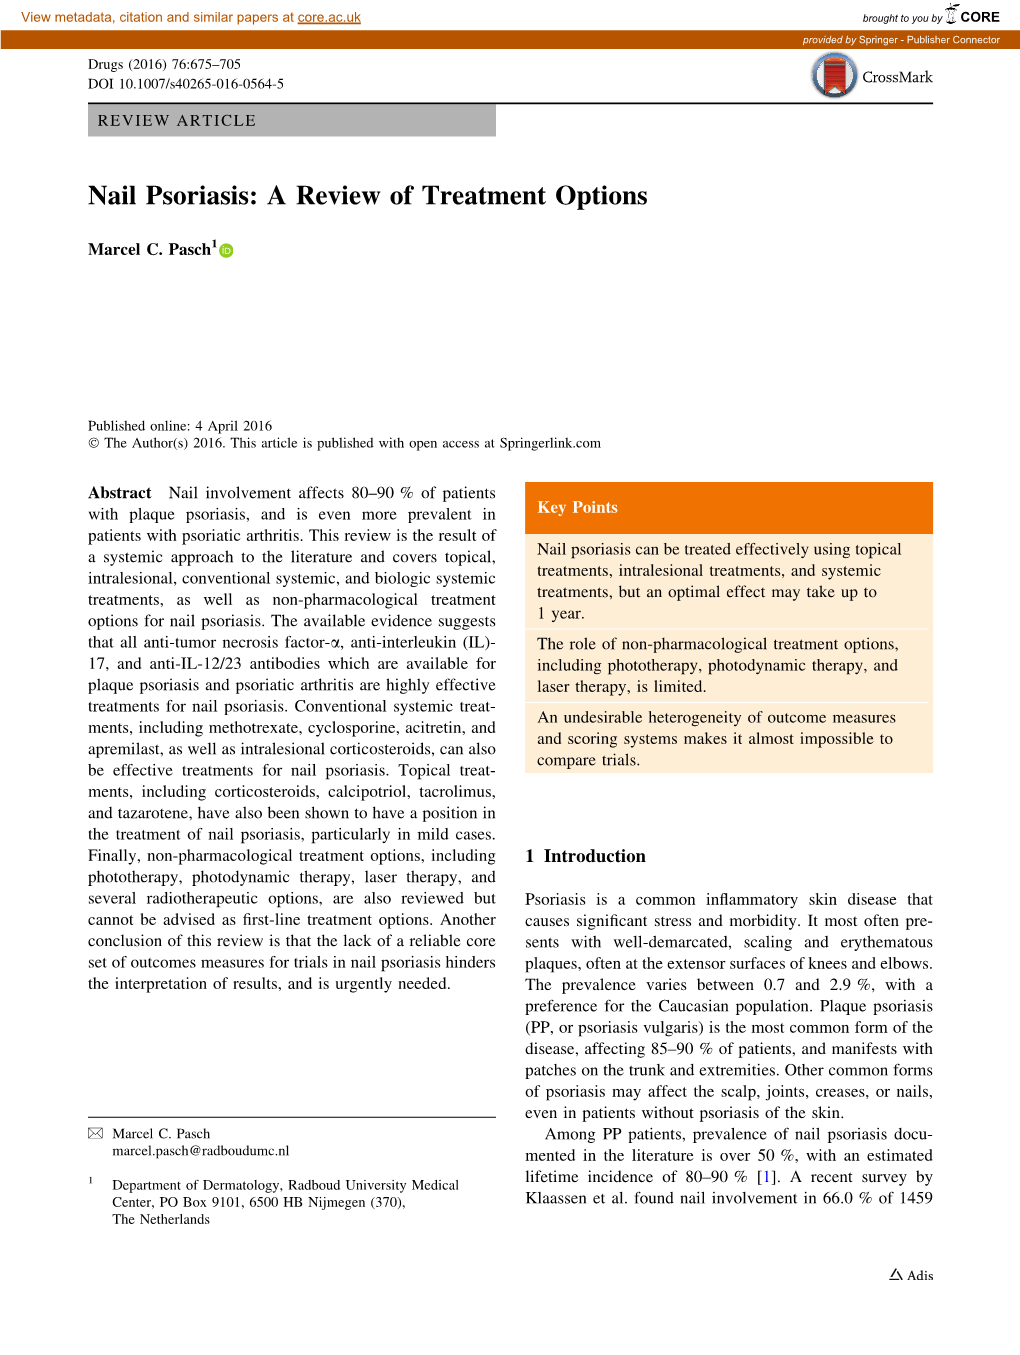 Nail Psoriasis: a Review of Treatment Options